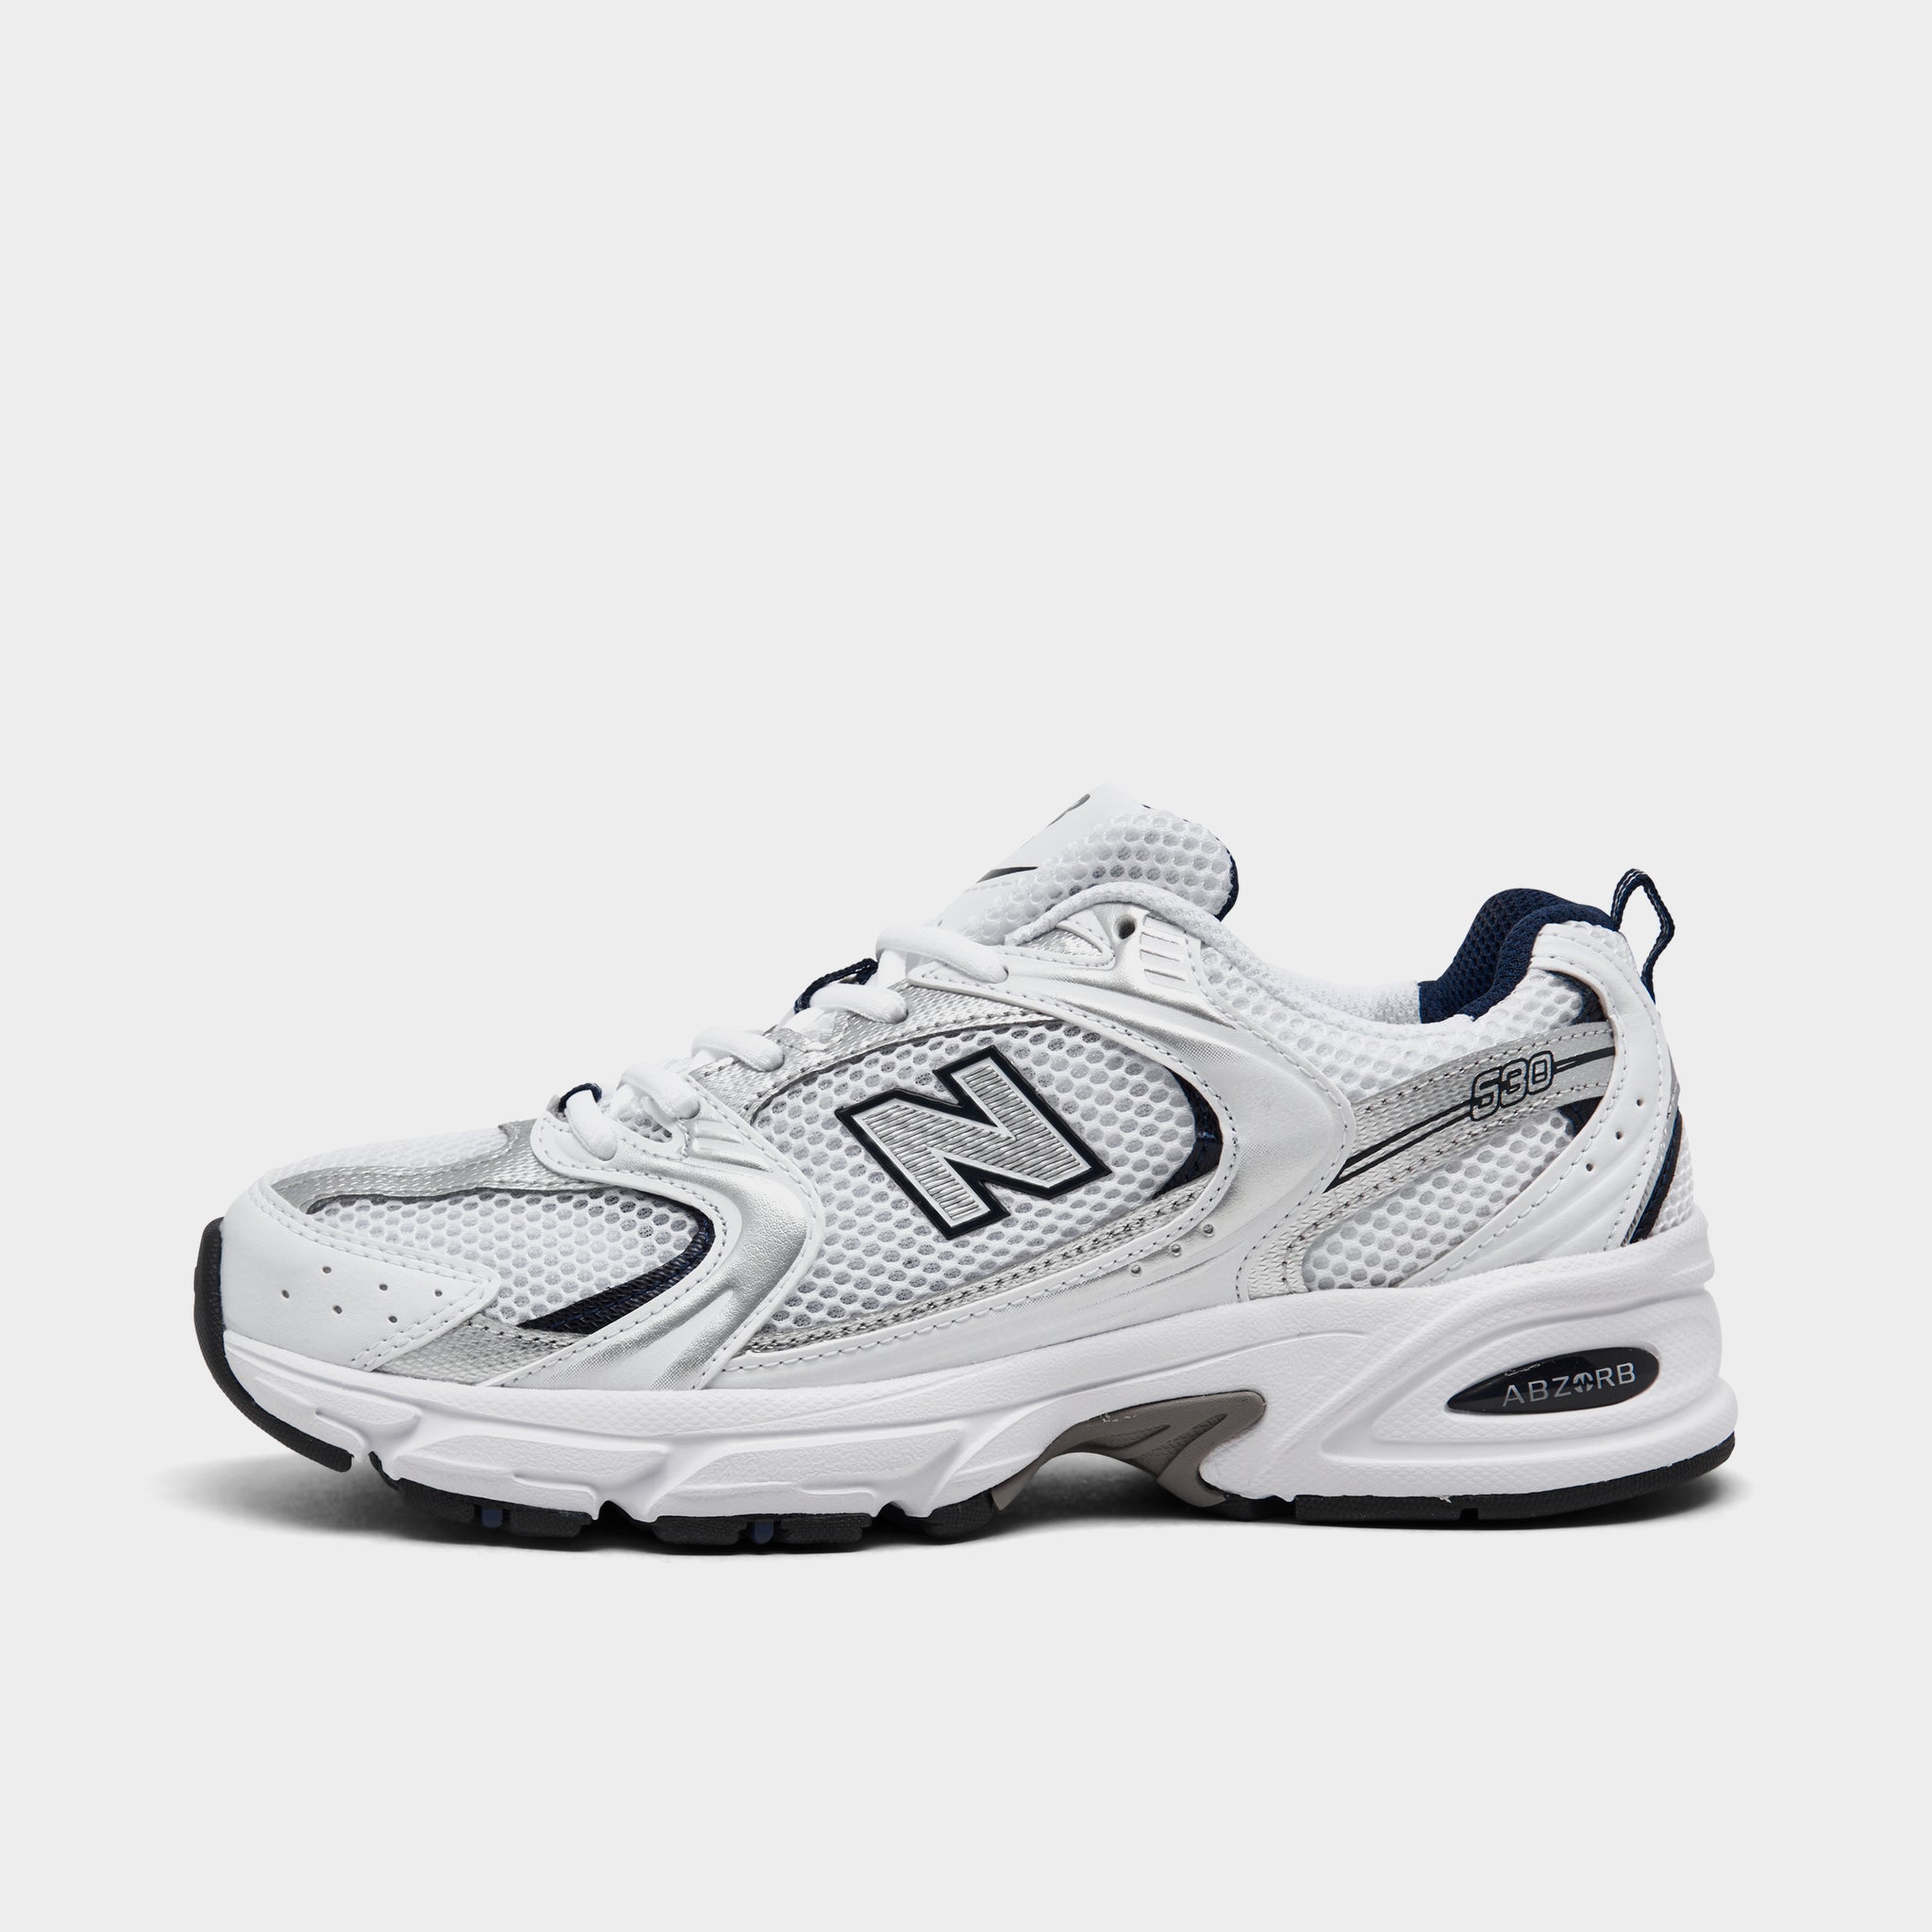 New Balance Men's MR530SG Sneakers in White/Blue (110), Size UK 8 | End Clothing